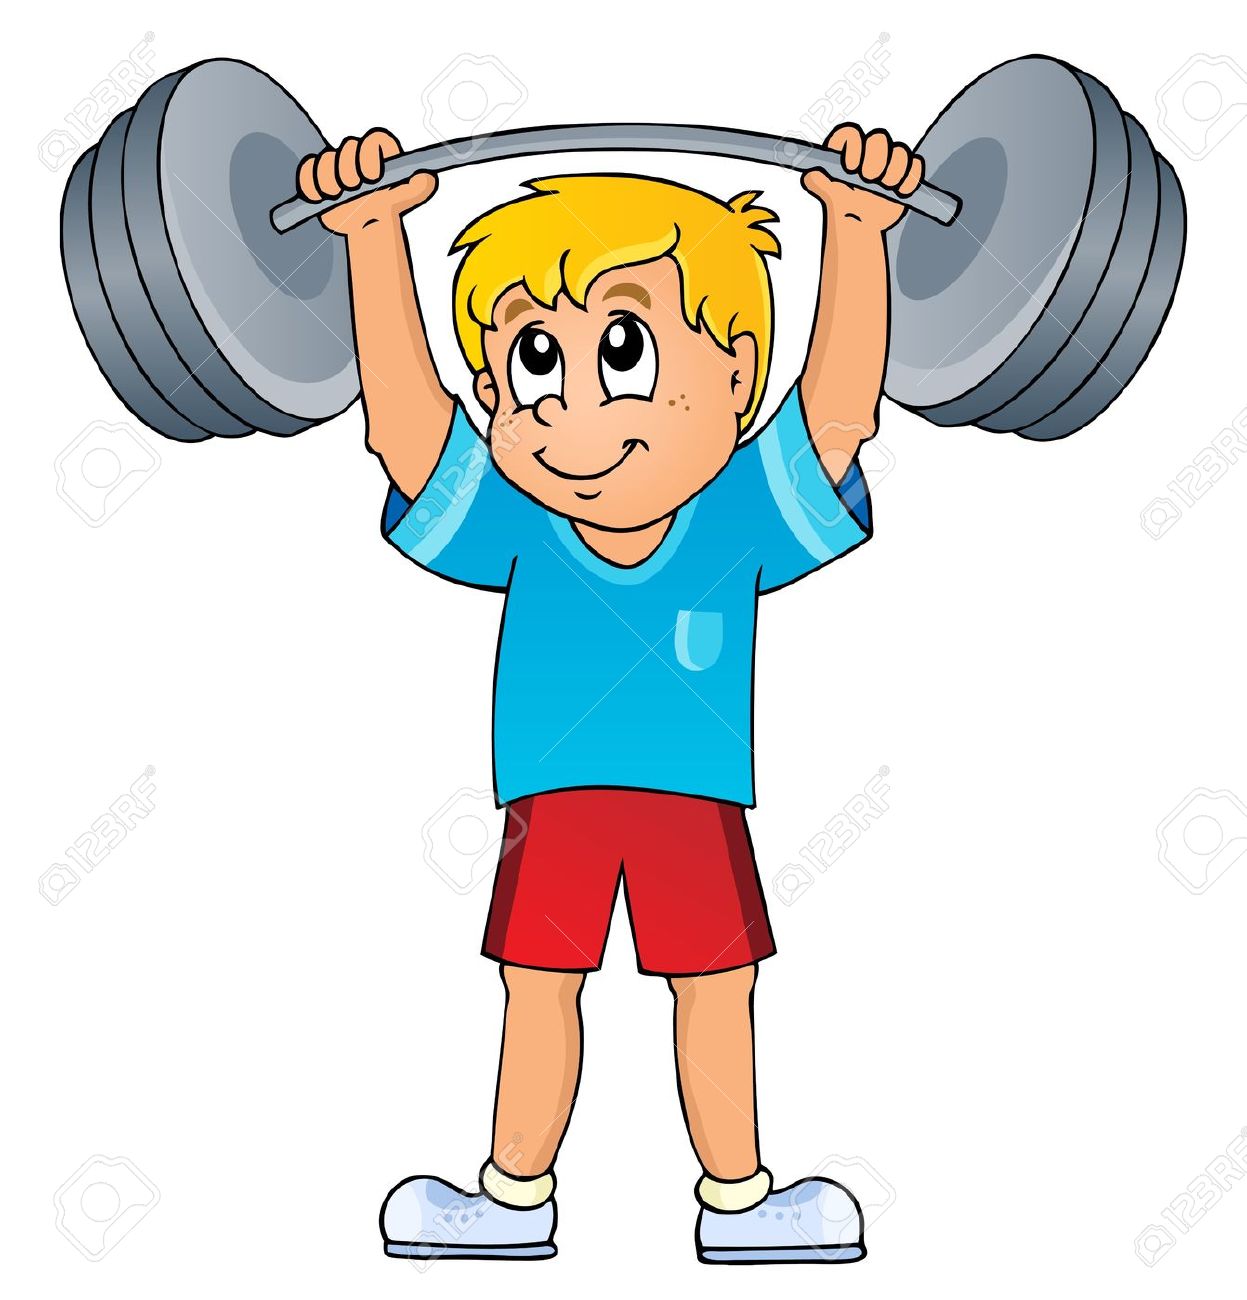 Lifting weights clip art - ClipartFest